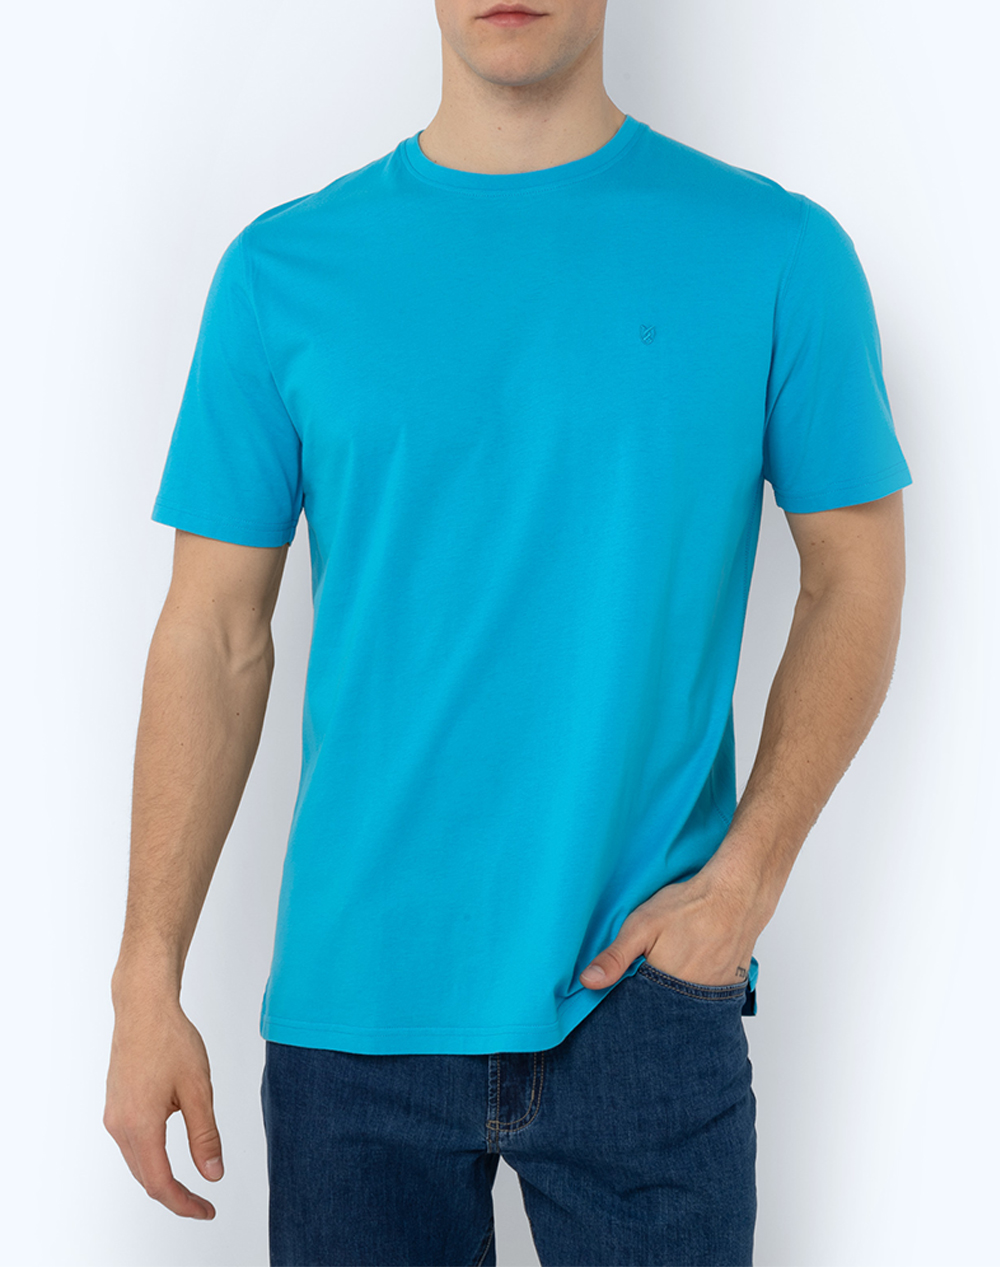 THE BOSTONIANS ΜΠΛΟΥΖΑ ESSENTIAL T-SHIRT REGULAR FIT 3TS1241-TURQUOISE Turquoise